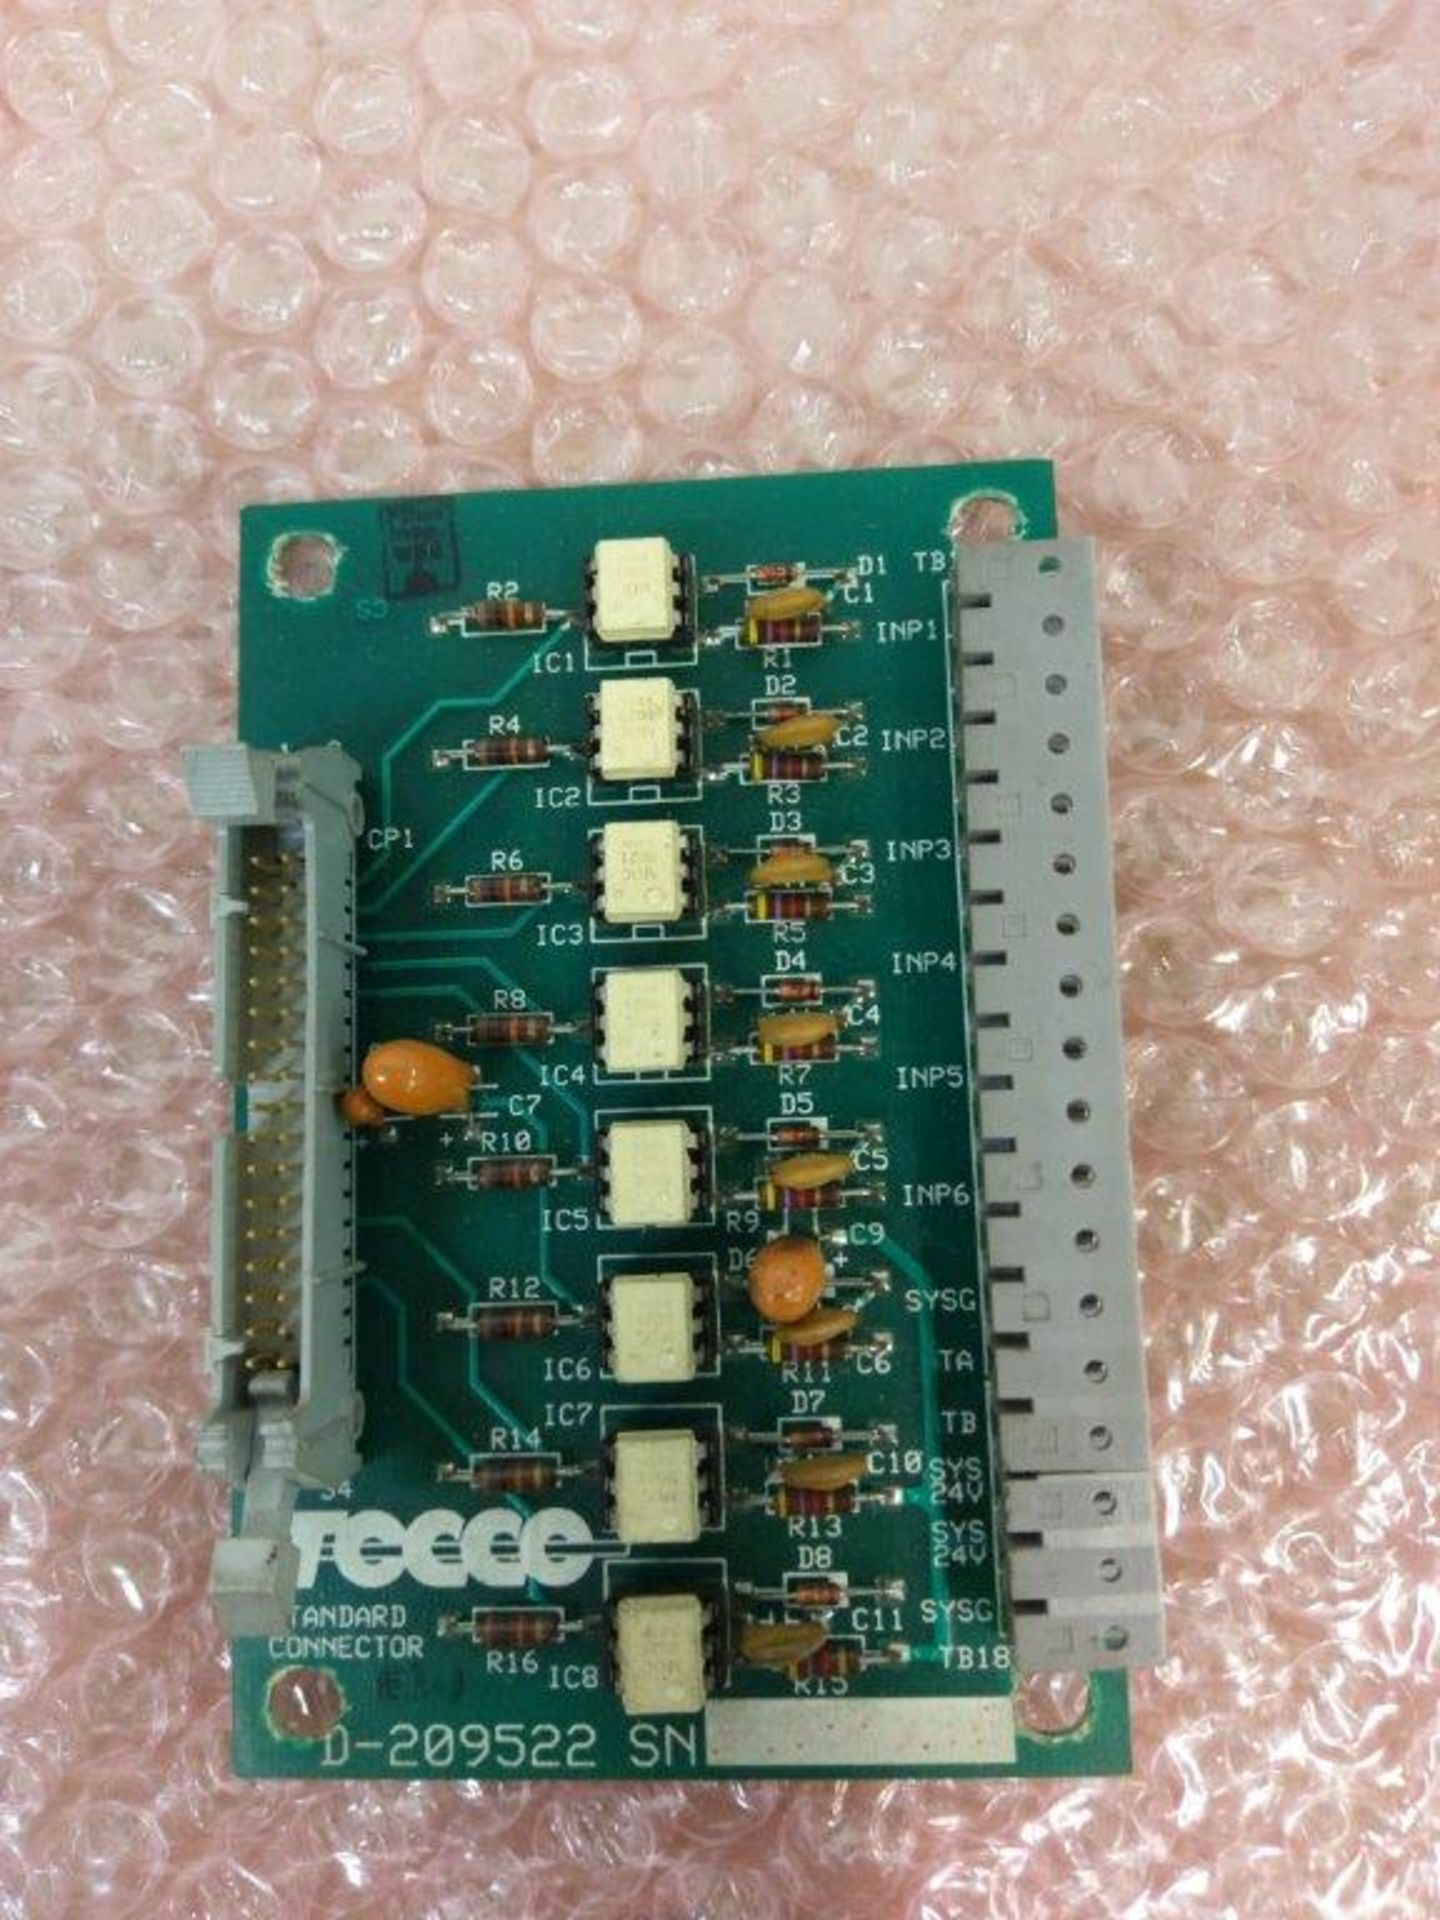 Tocco Standard Connector Board Model D-209522 - Image 2 of 2